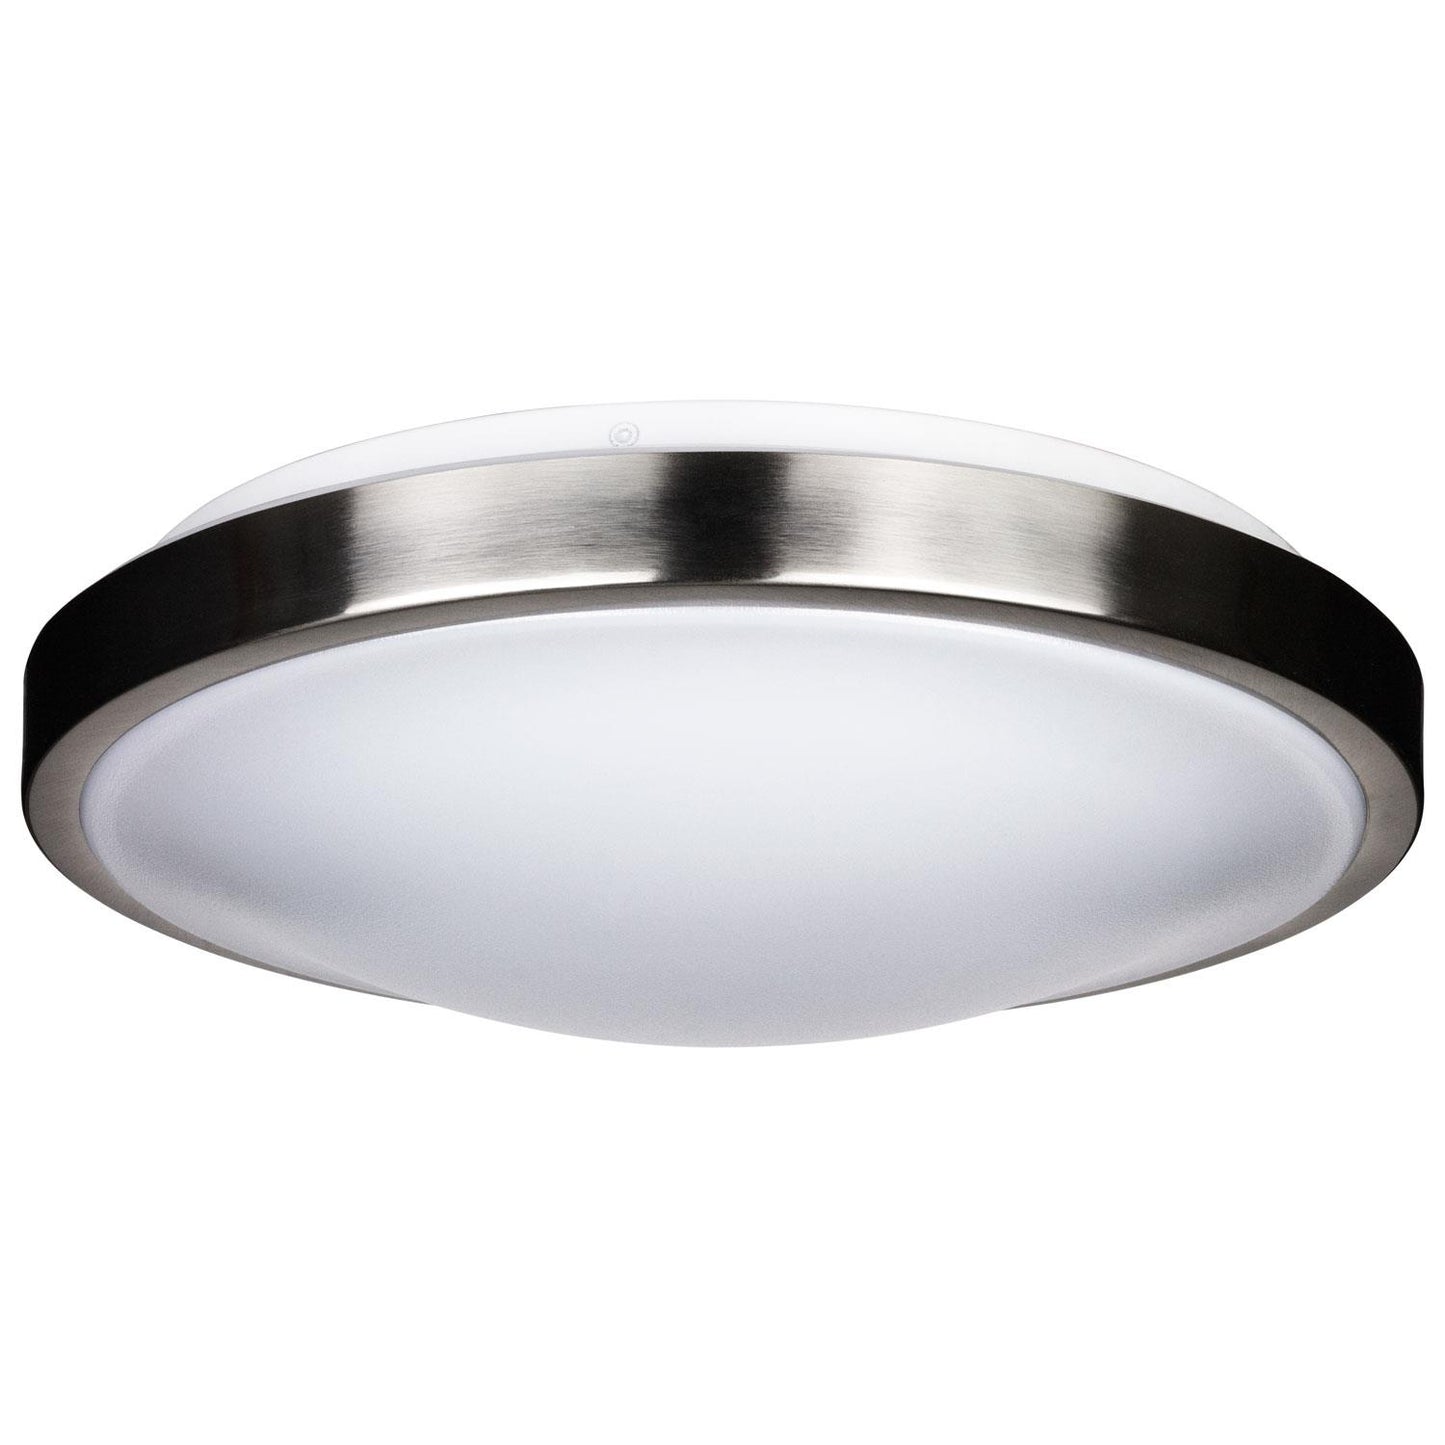 Sunlite 49150-SU LED Ceiling Light Fixture with Brushed Nickel Trim, 15 Watts, Dimmable, 12-Inch, 30K - Warm White